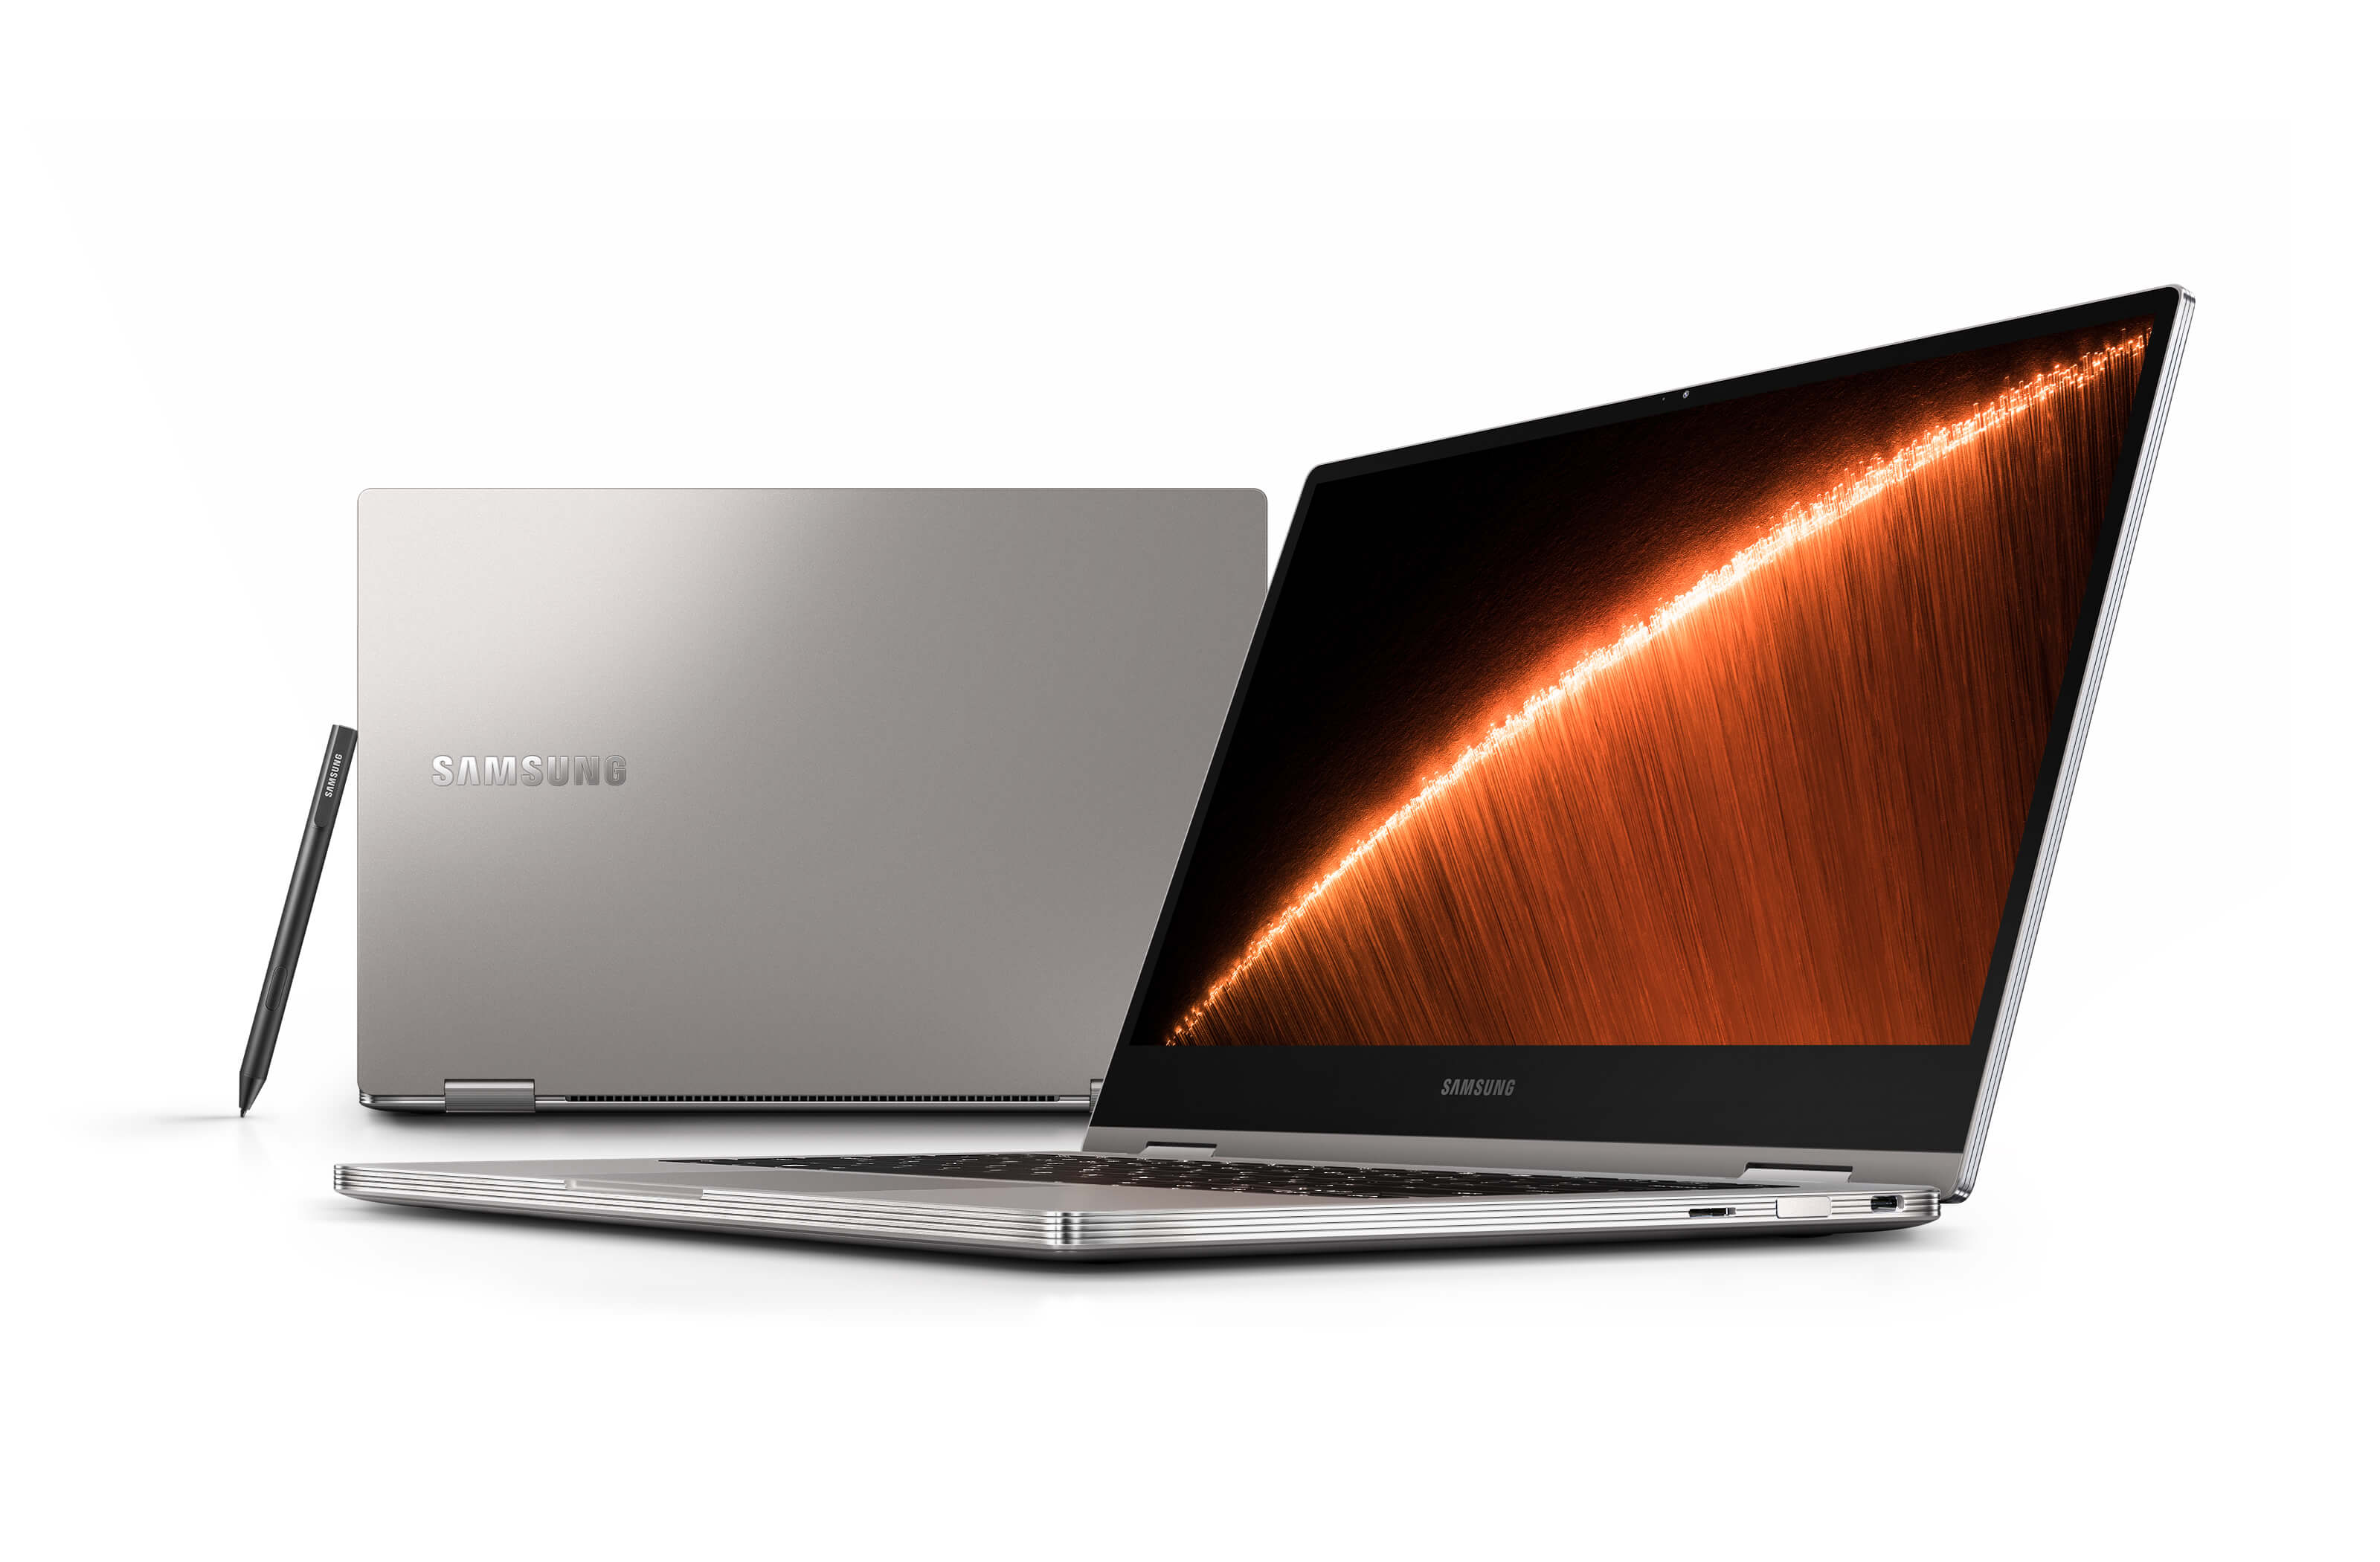 The Samsung Notebook 9 Pro is one of the best affordable laptops for music production. An Intel I7 processor and 8GB of RAM make for fast and efficient processing.